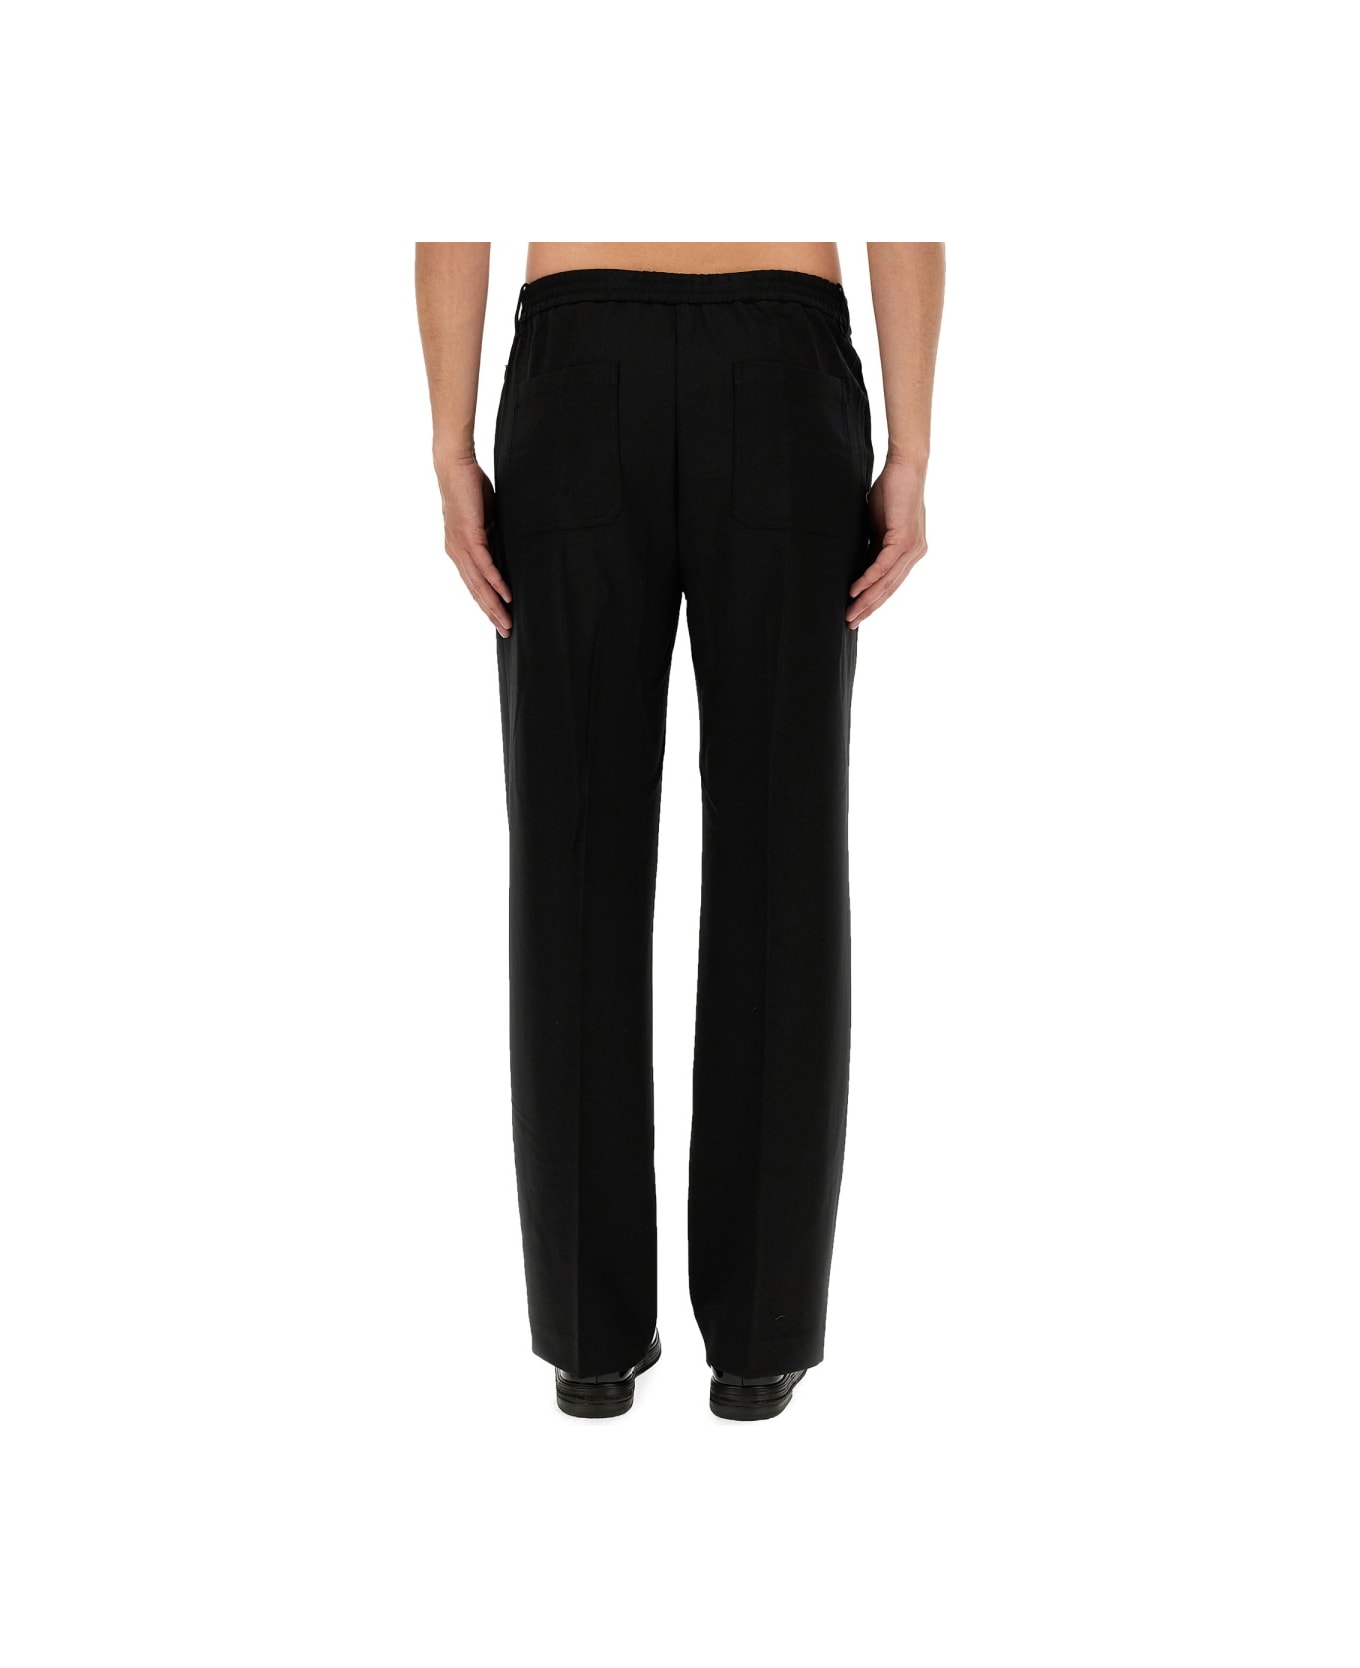 Helmut Lang Relaxed Fit Pants - BLACK ボトムス